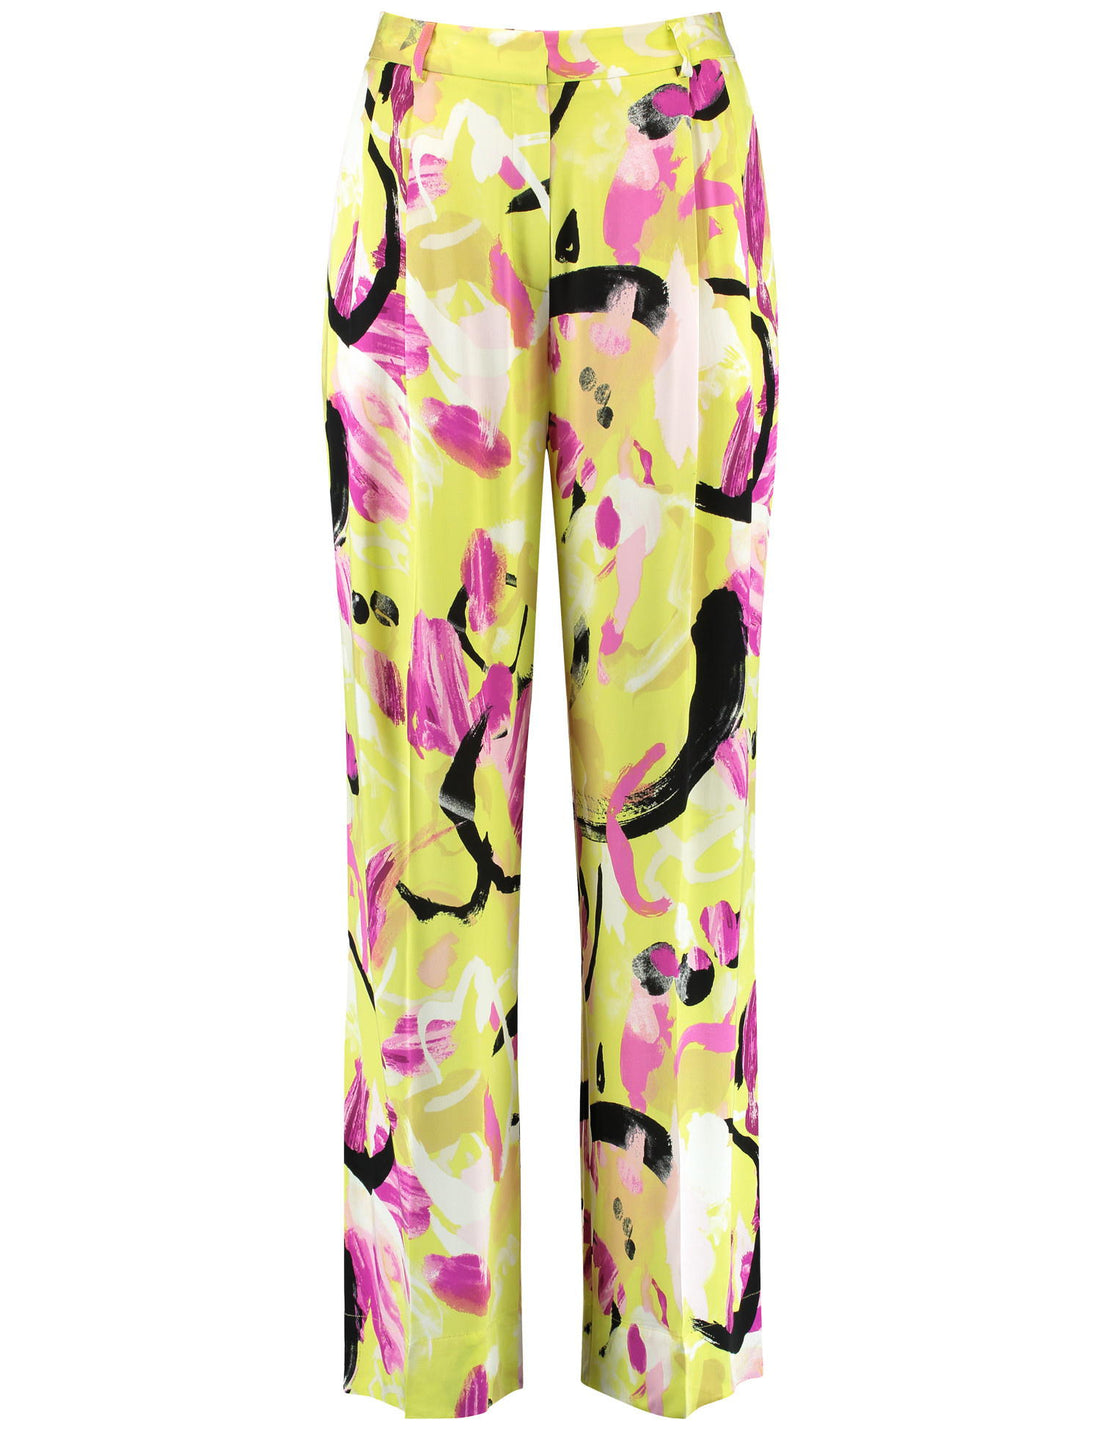 Flowing Palazzo Trousers With A Floral Print_520308-11019_4142_02